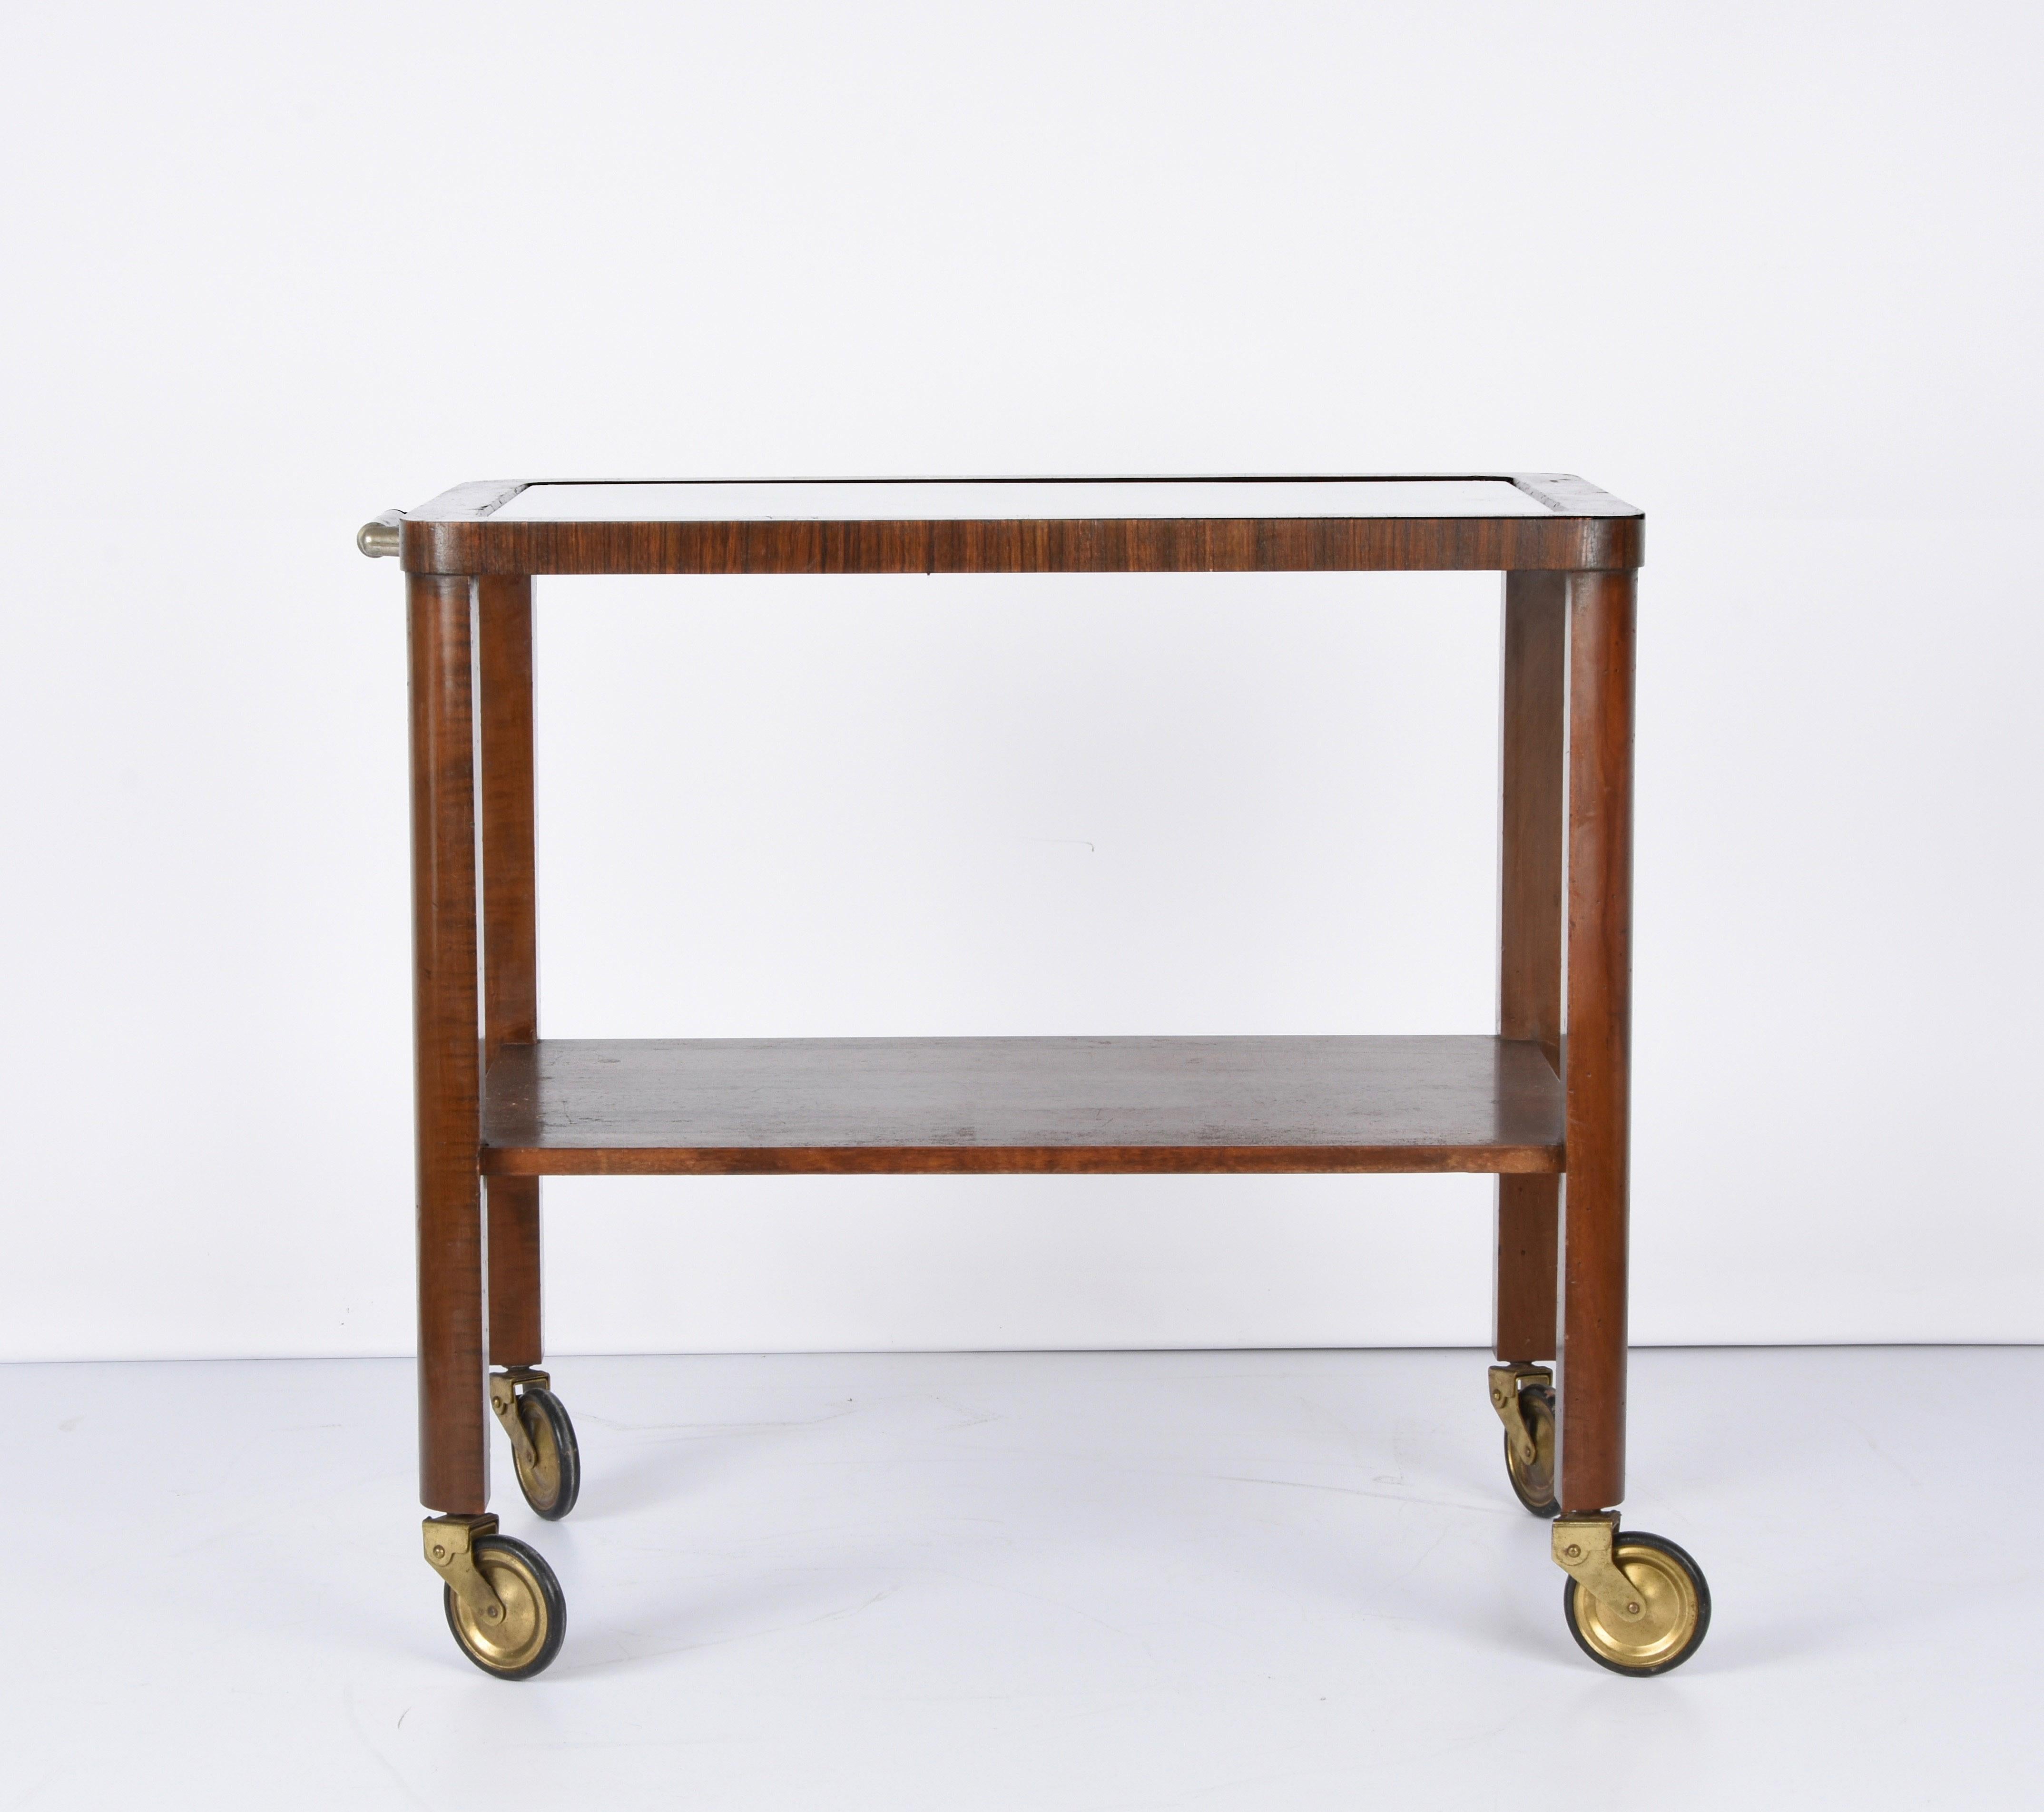 Art Deco Solid Walnut Wood and Glass Two-Levels Italian Trolley Bar Cart, 1940s For Sale 3